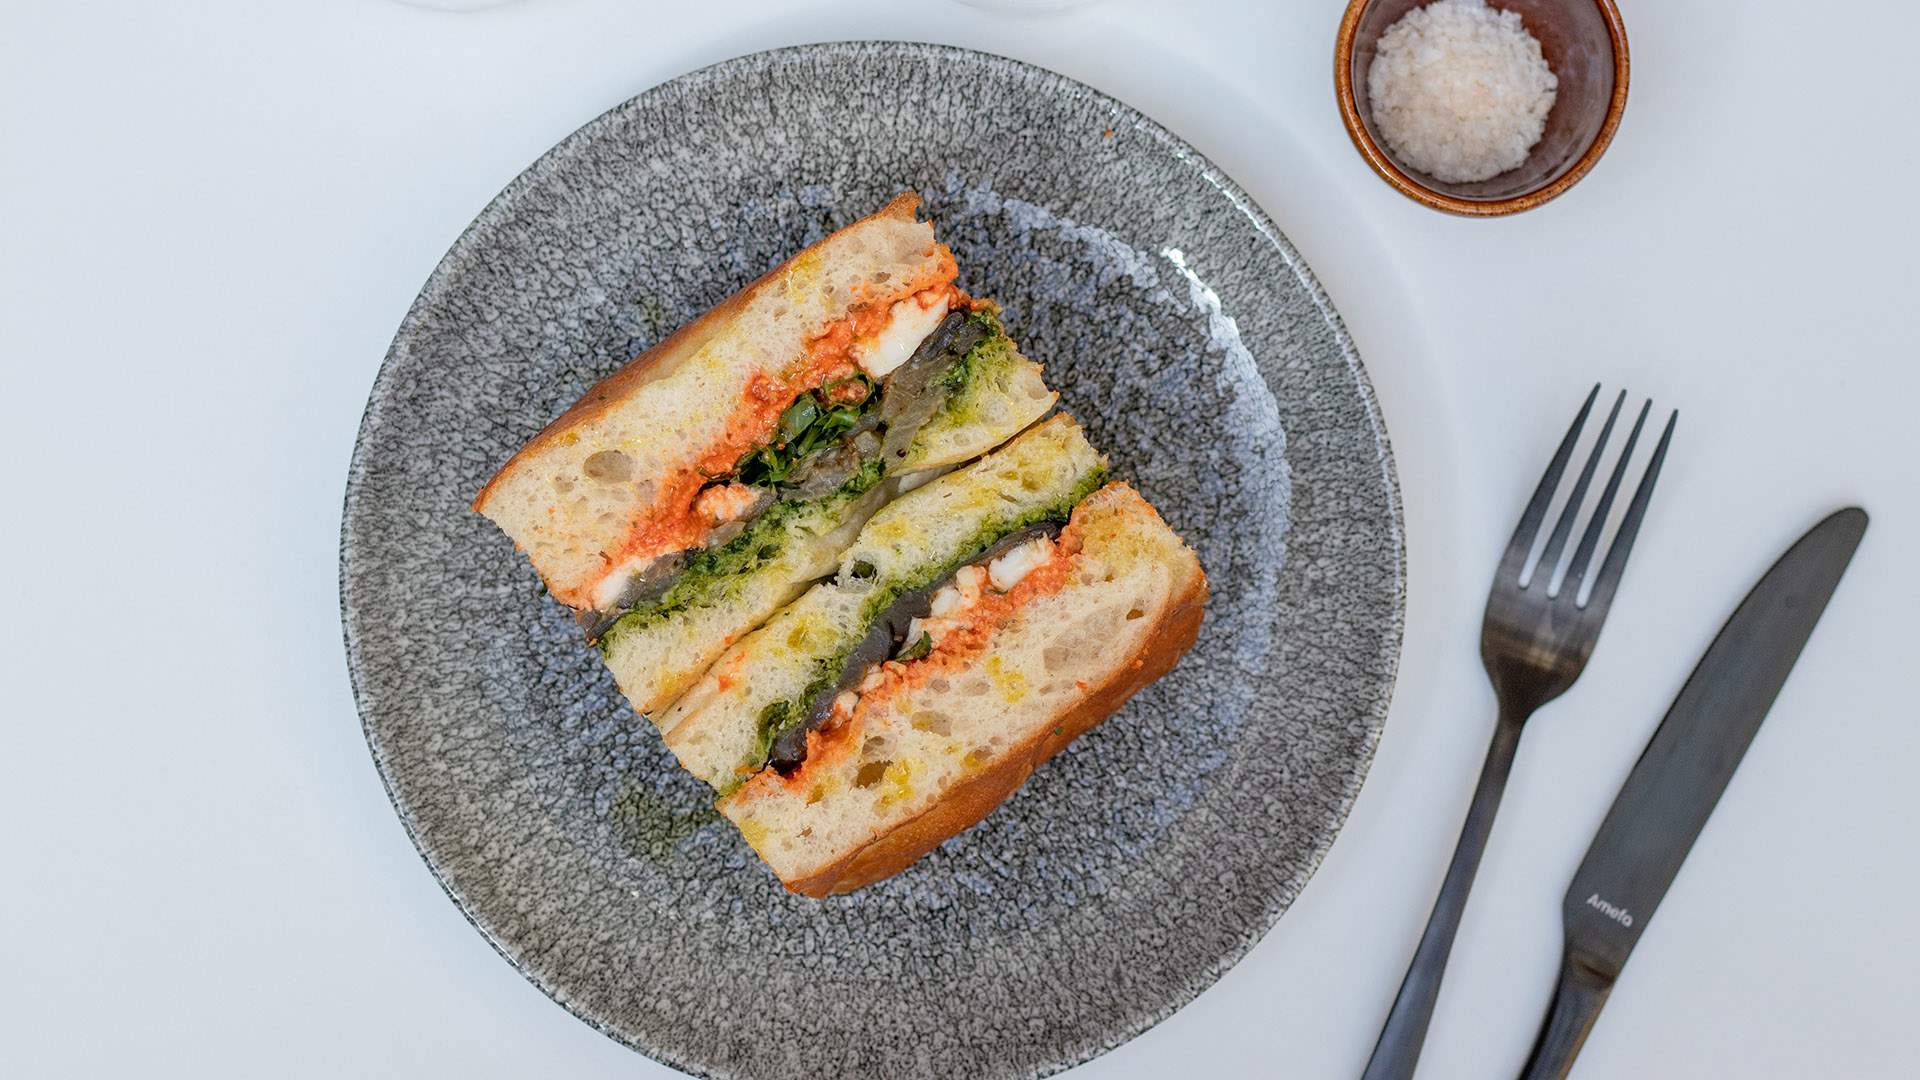 Portal Is the New Martin Place Eatery That's Giving All of Its Profits To Charity